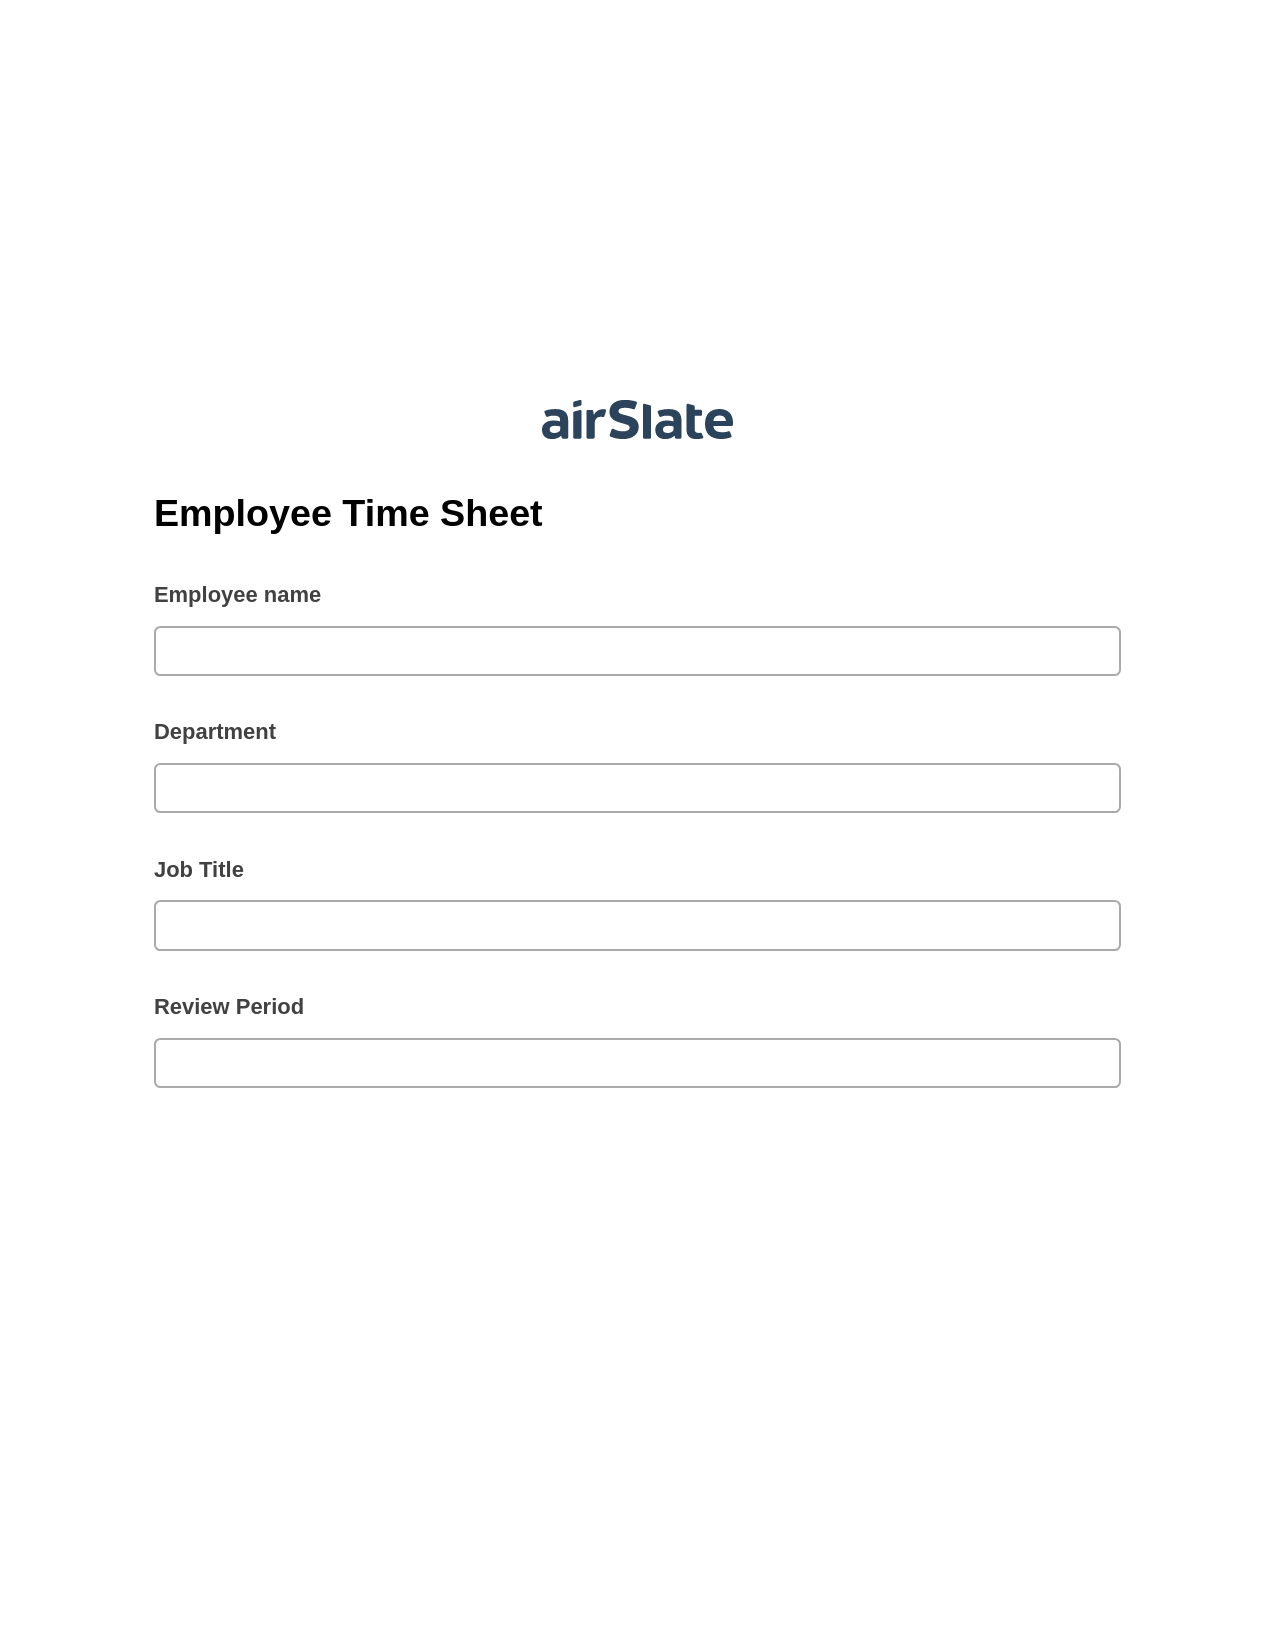 Employee Time Sheet Prefill from NetSuite records, Create Salesforce Records Bot, Slack Notification Postfinish Bot